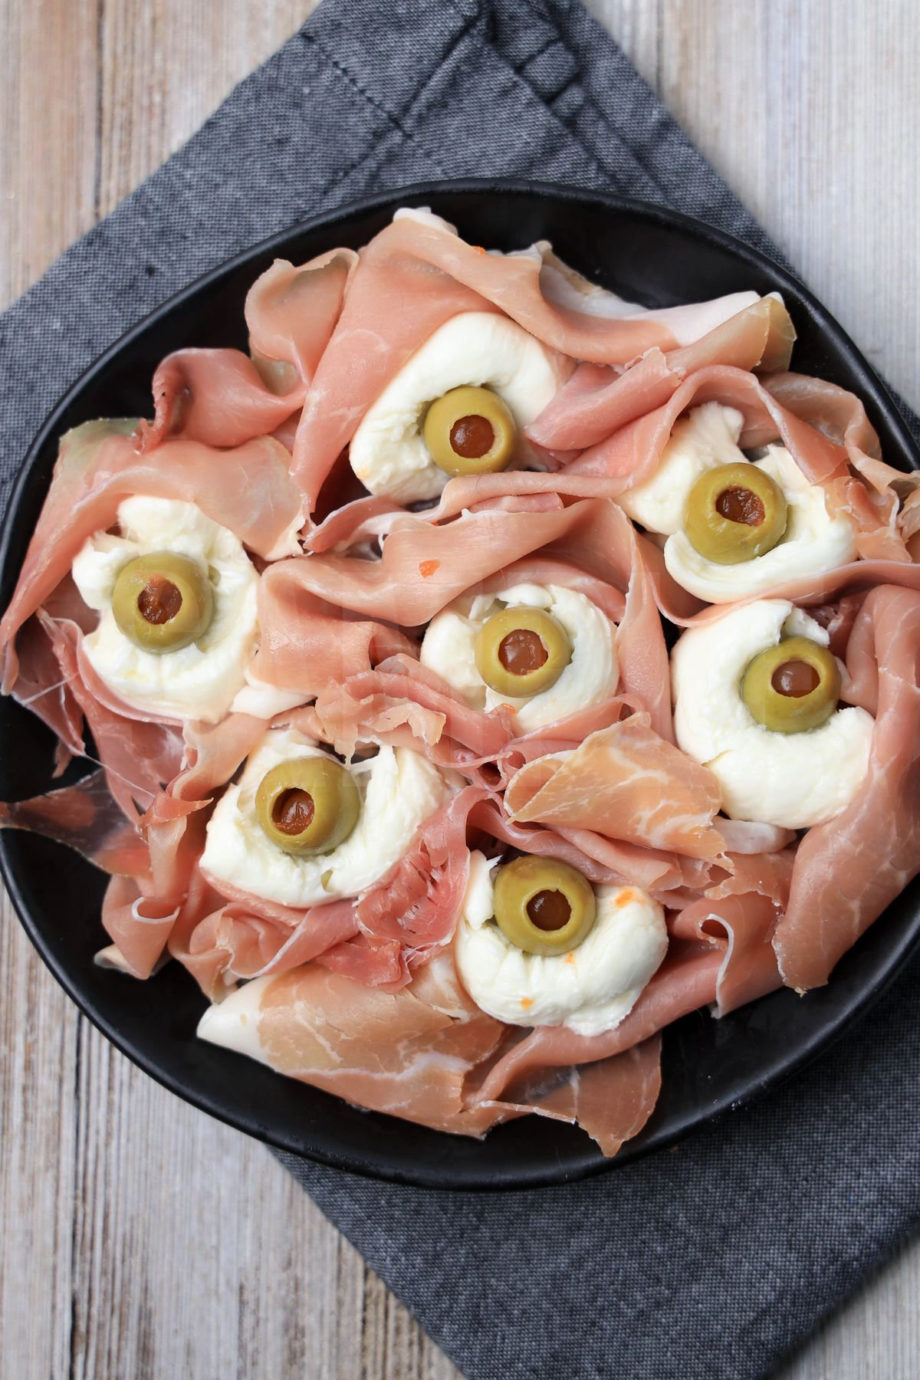 The Prosciutto Eyeballs comes on a black plate with a denim napkin on a rustic wood backdrop.